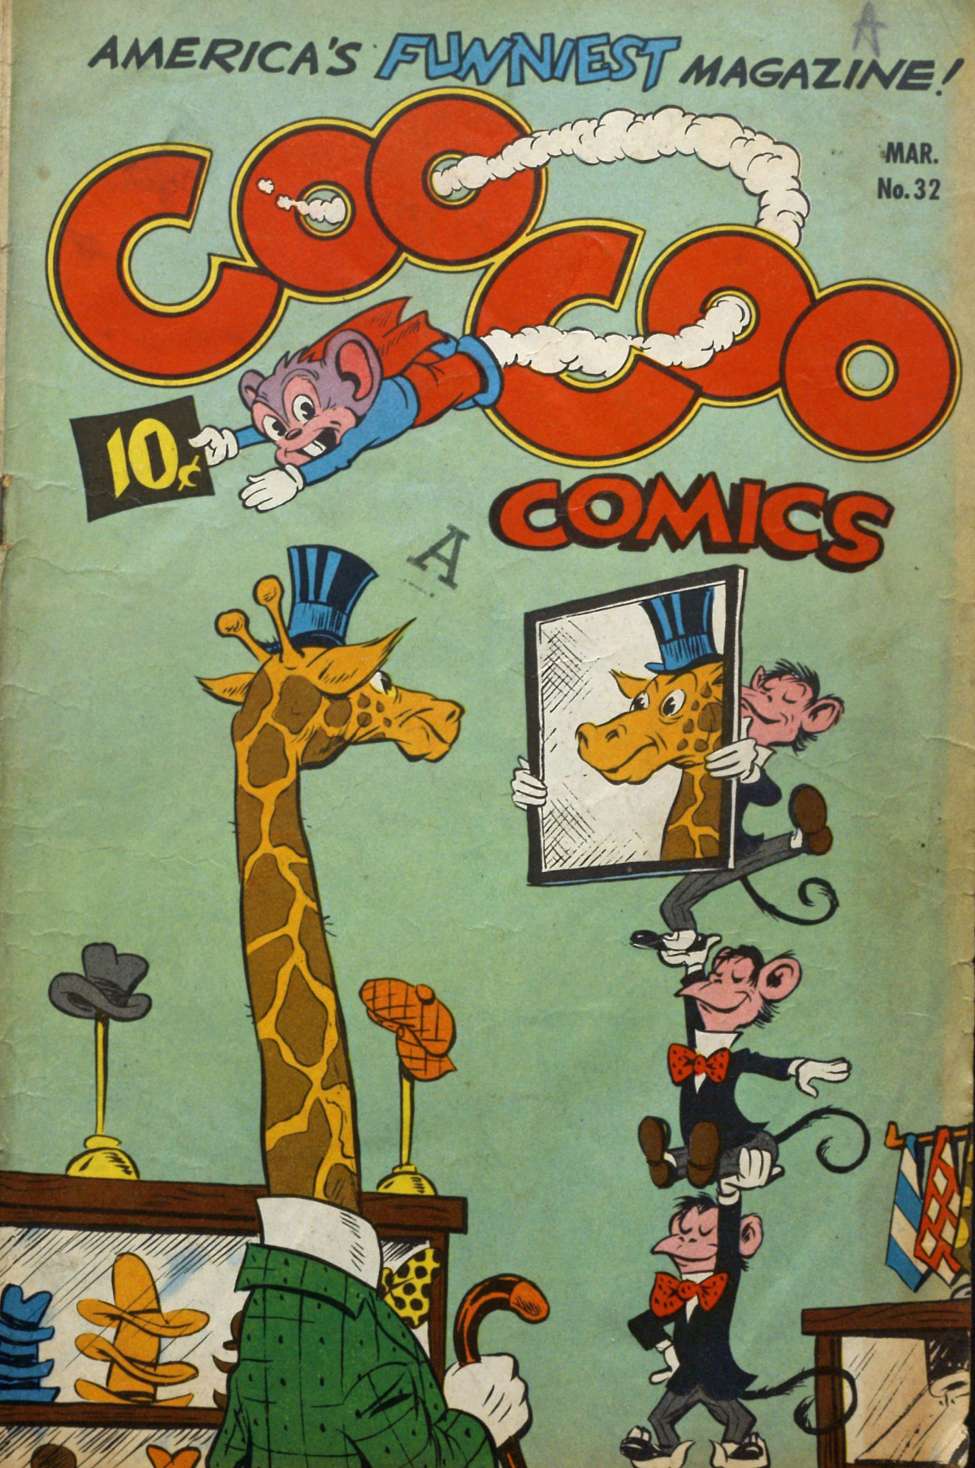 Book Cover For Coo Coo Comics 32 (alt) - Version 1